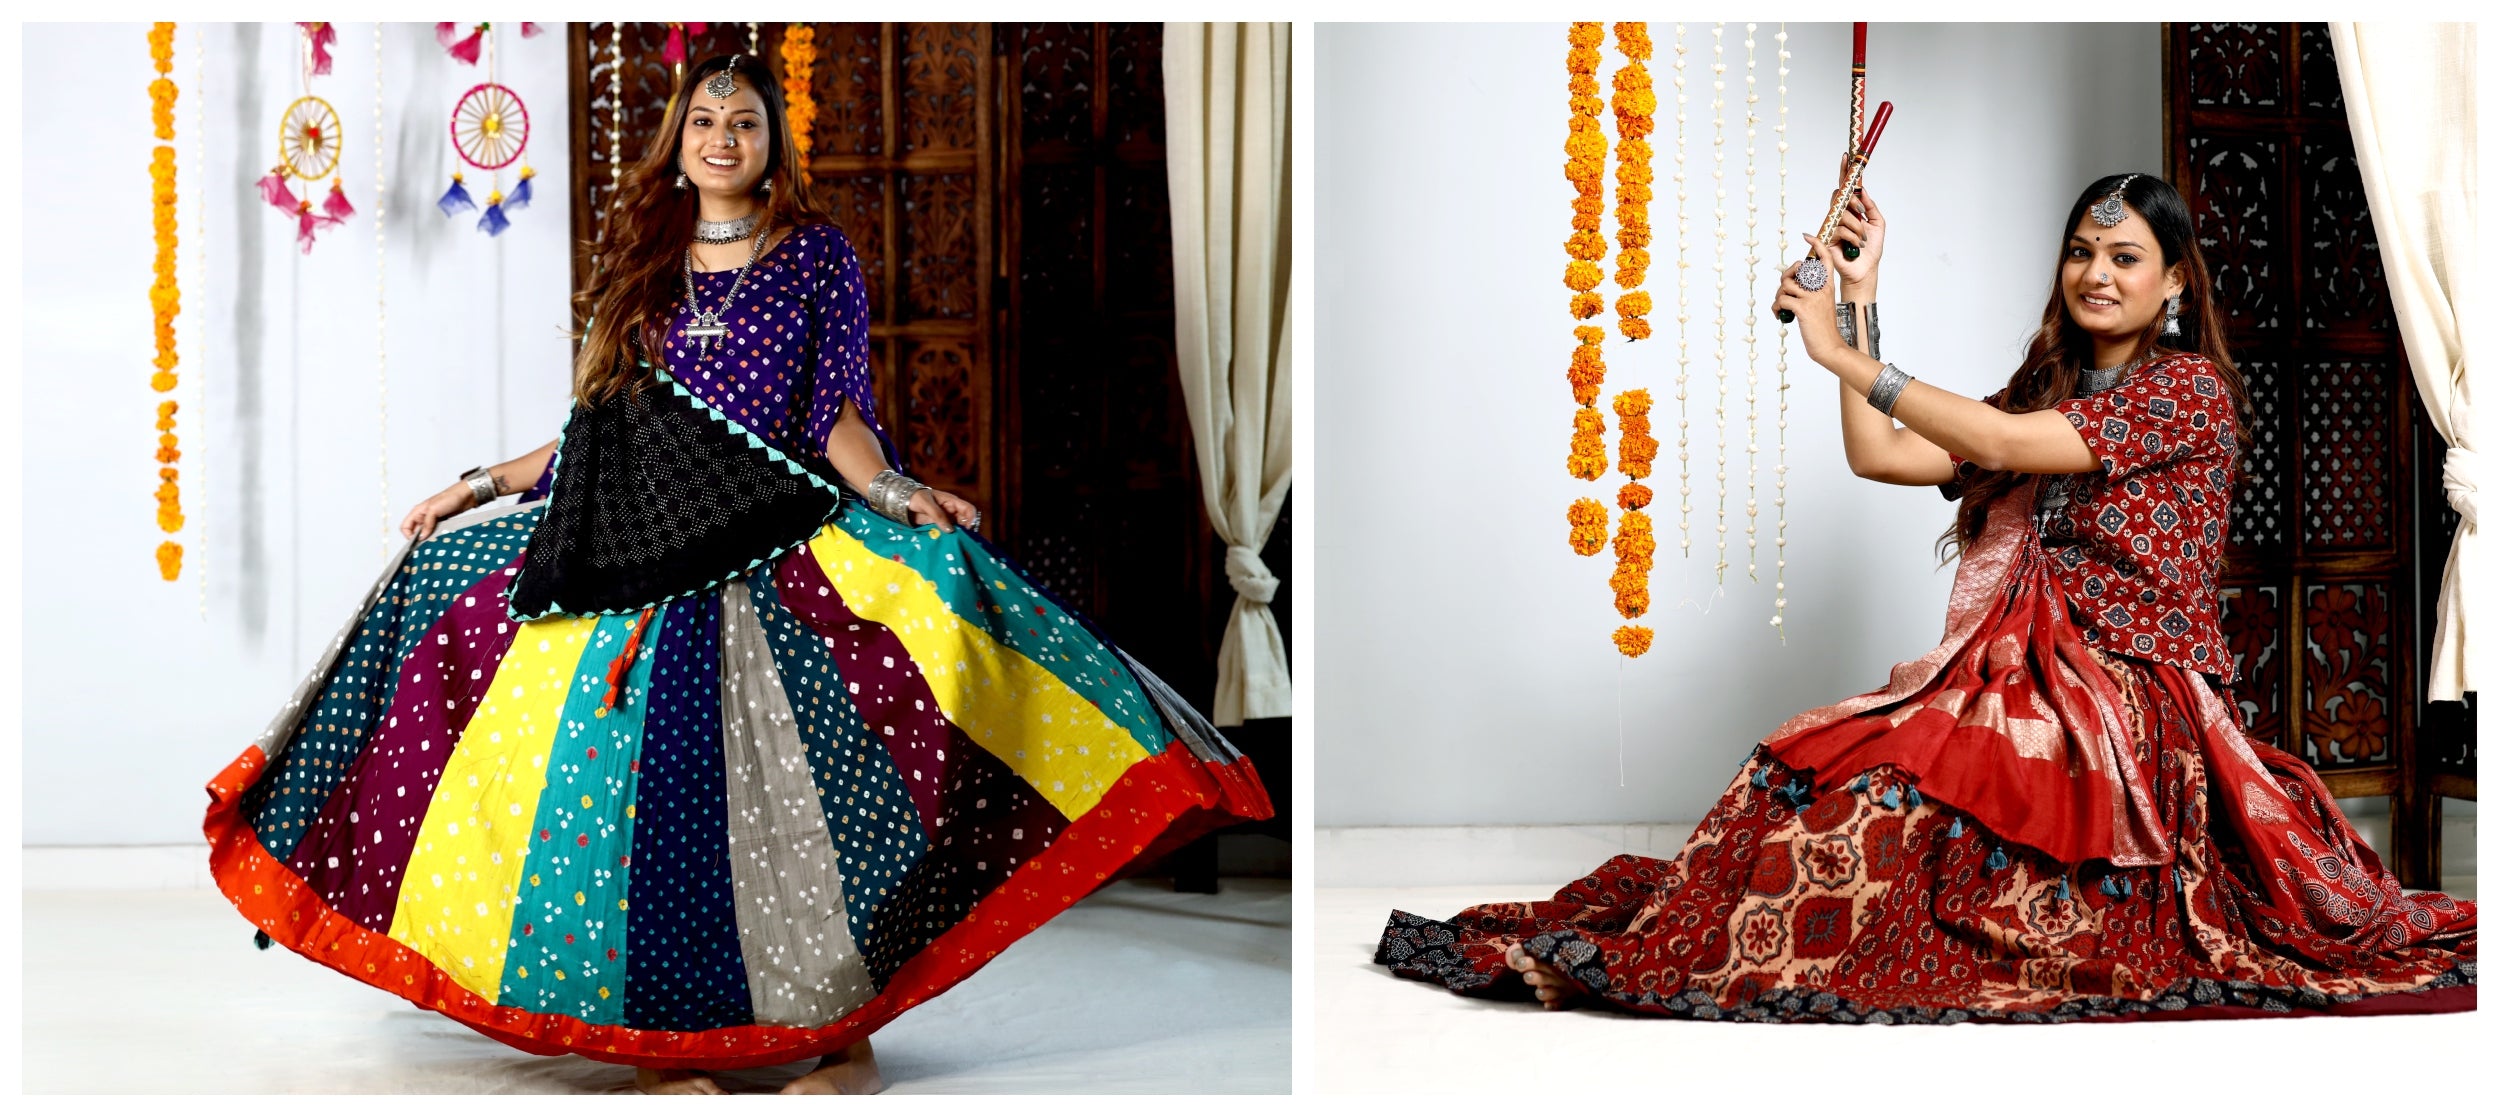 What to Wear for This Year's Garba Dance?